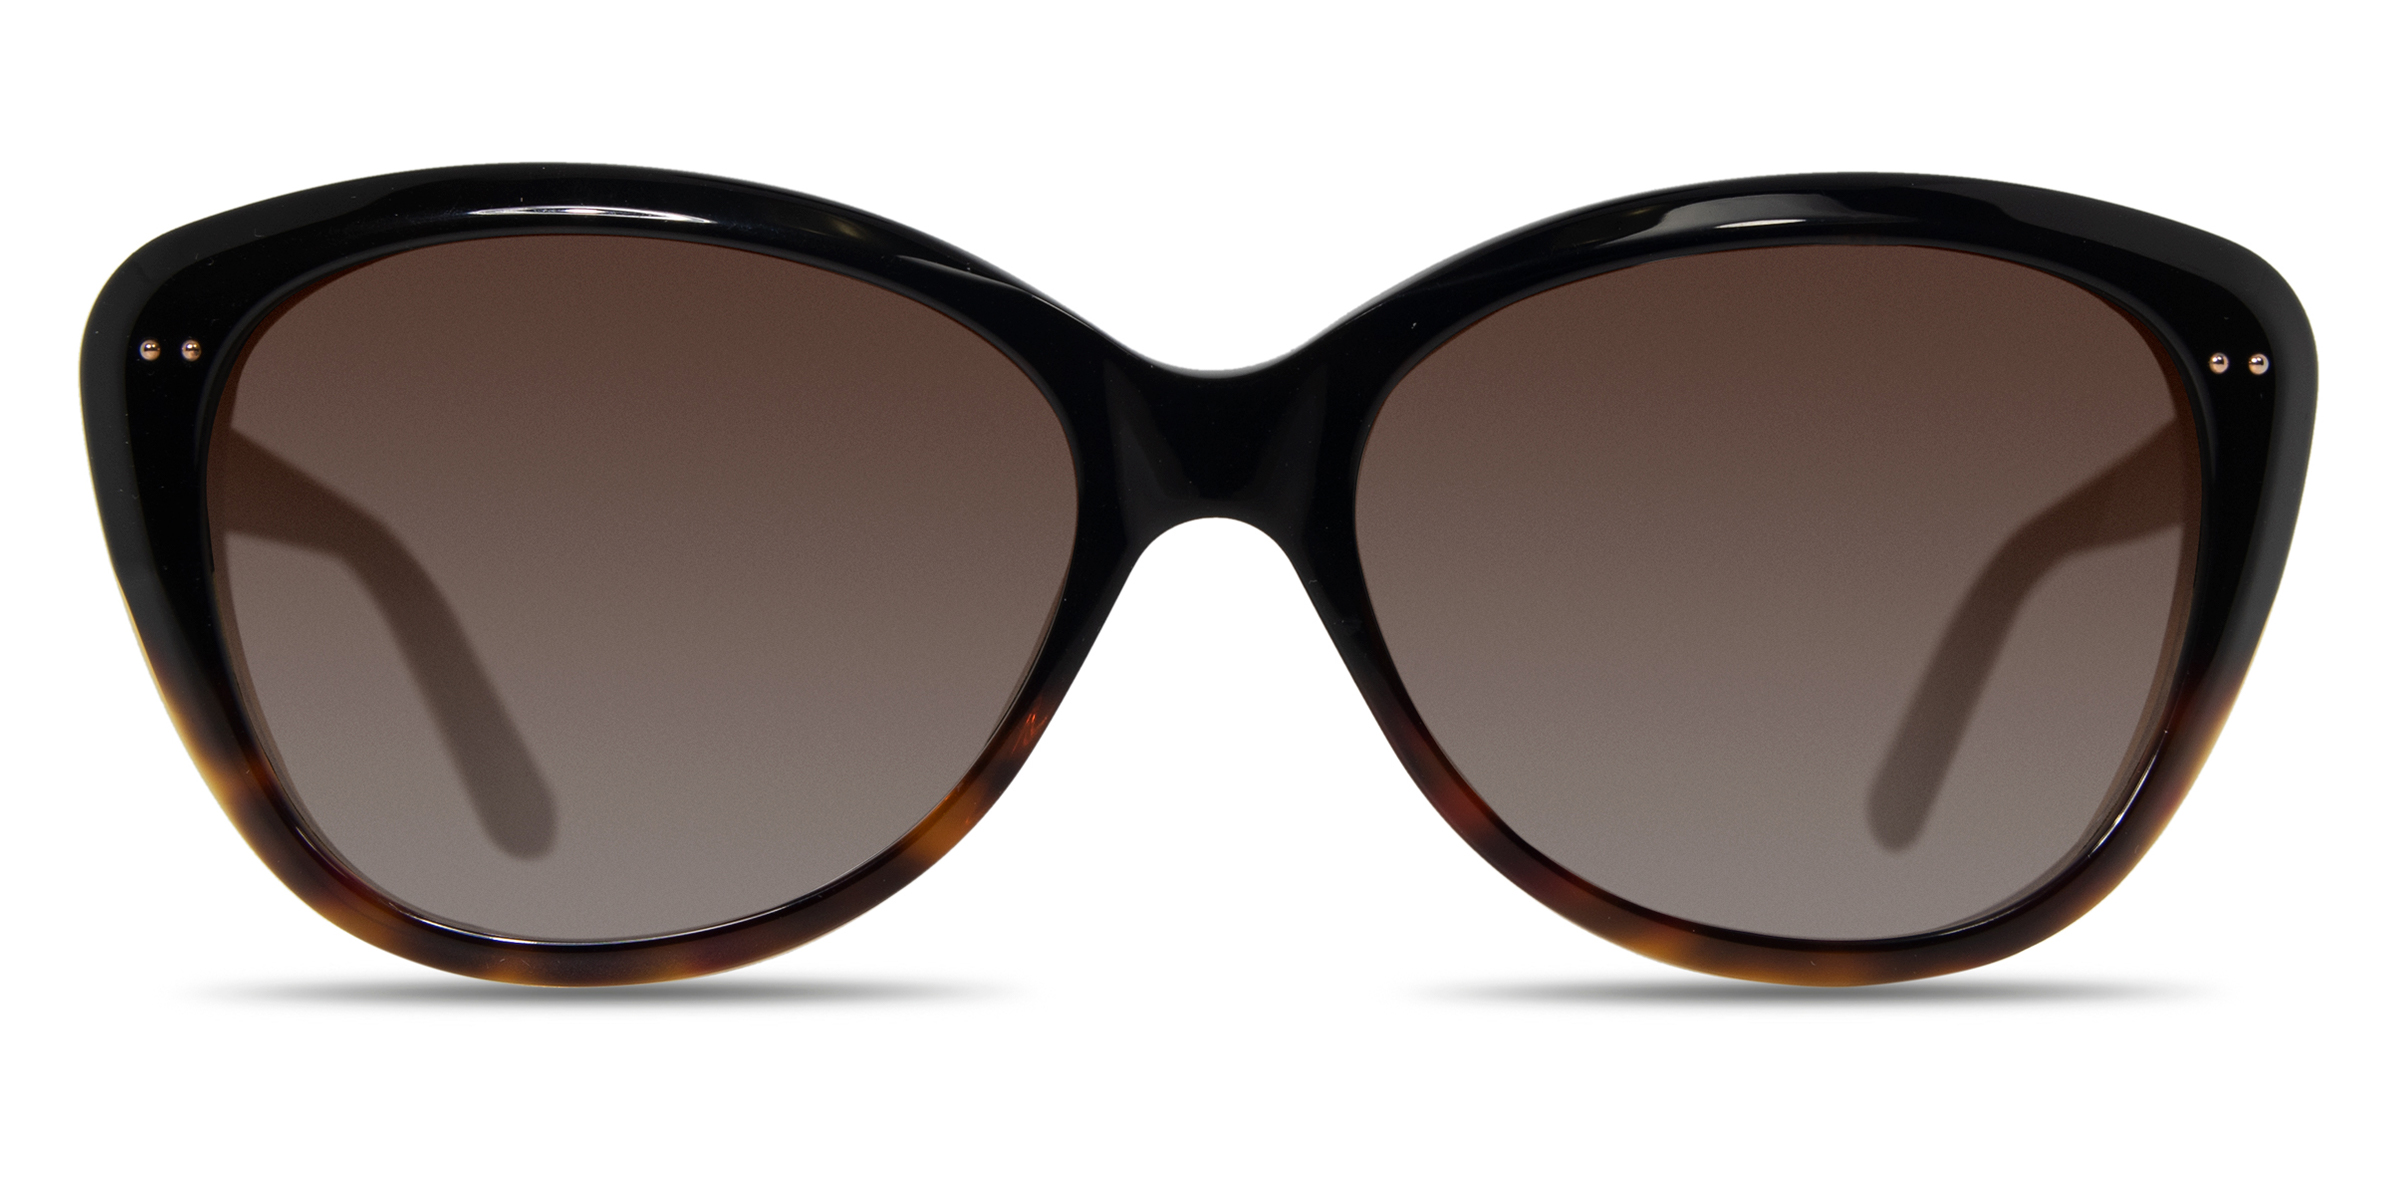 Buy Kate Spade Angelique sunglasses for women at For Eyes